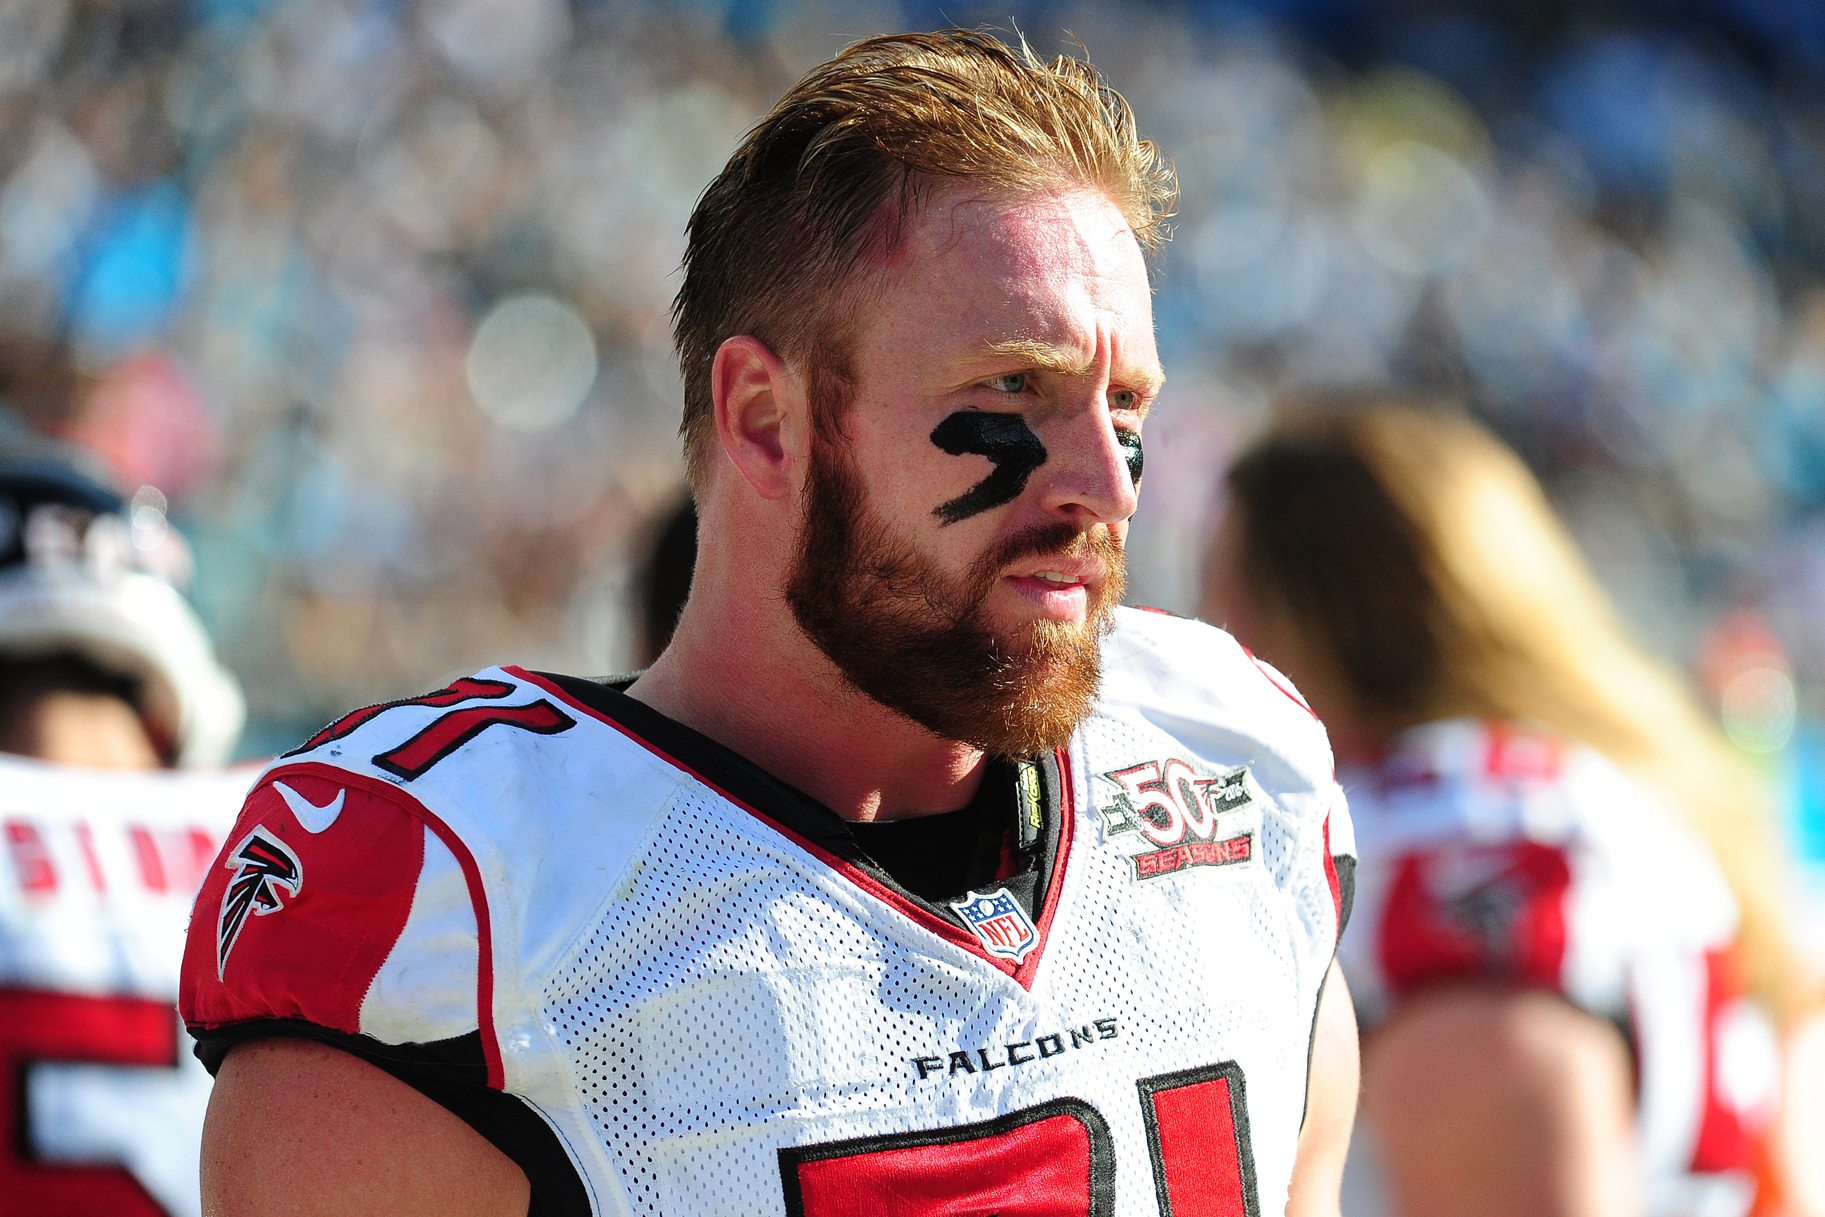 Kroy Biermann Faces Lawsuit From Chase Bank For $10,000 Credit Card Debt